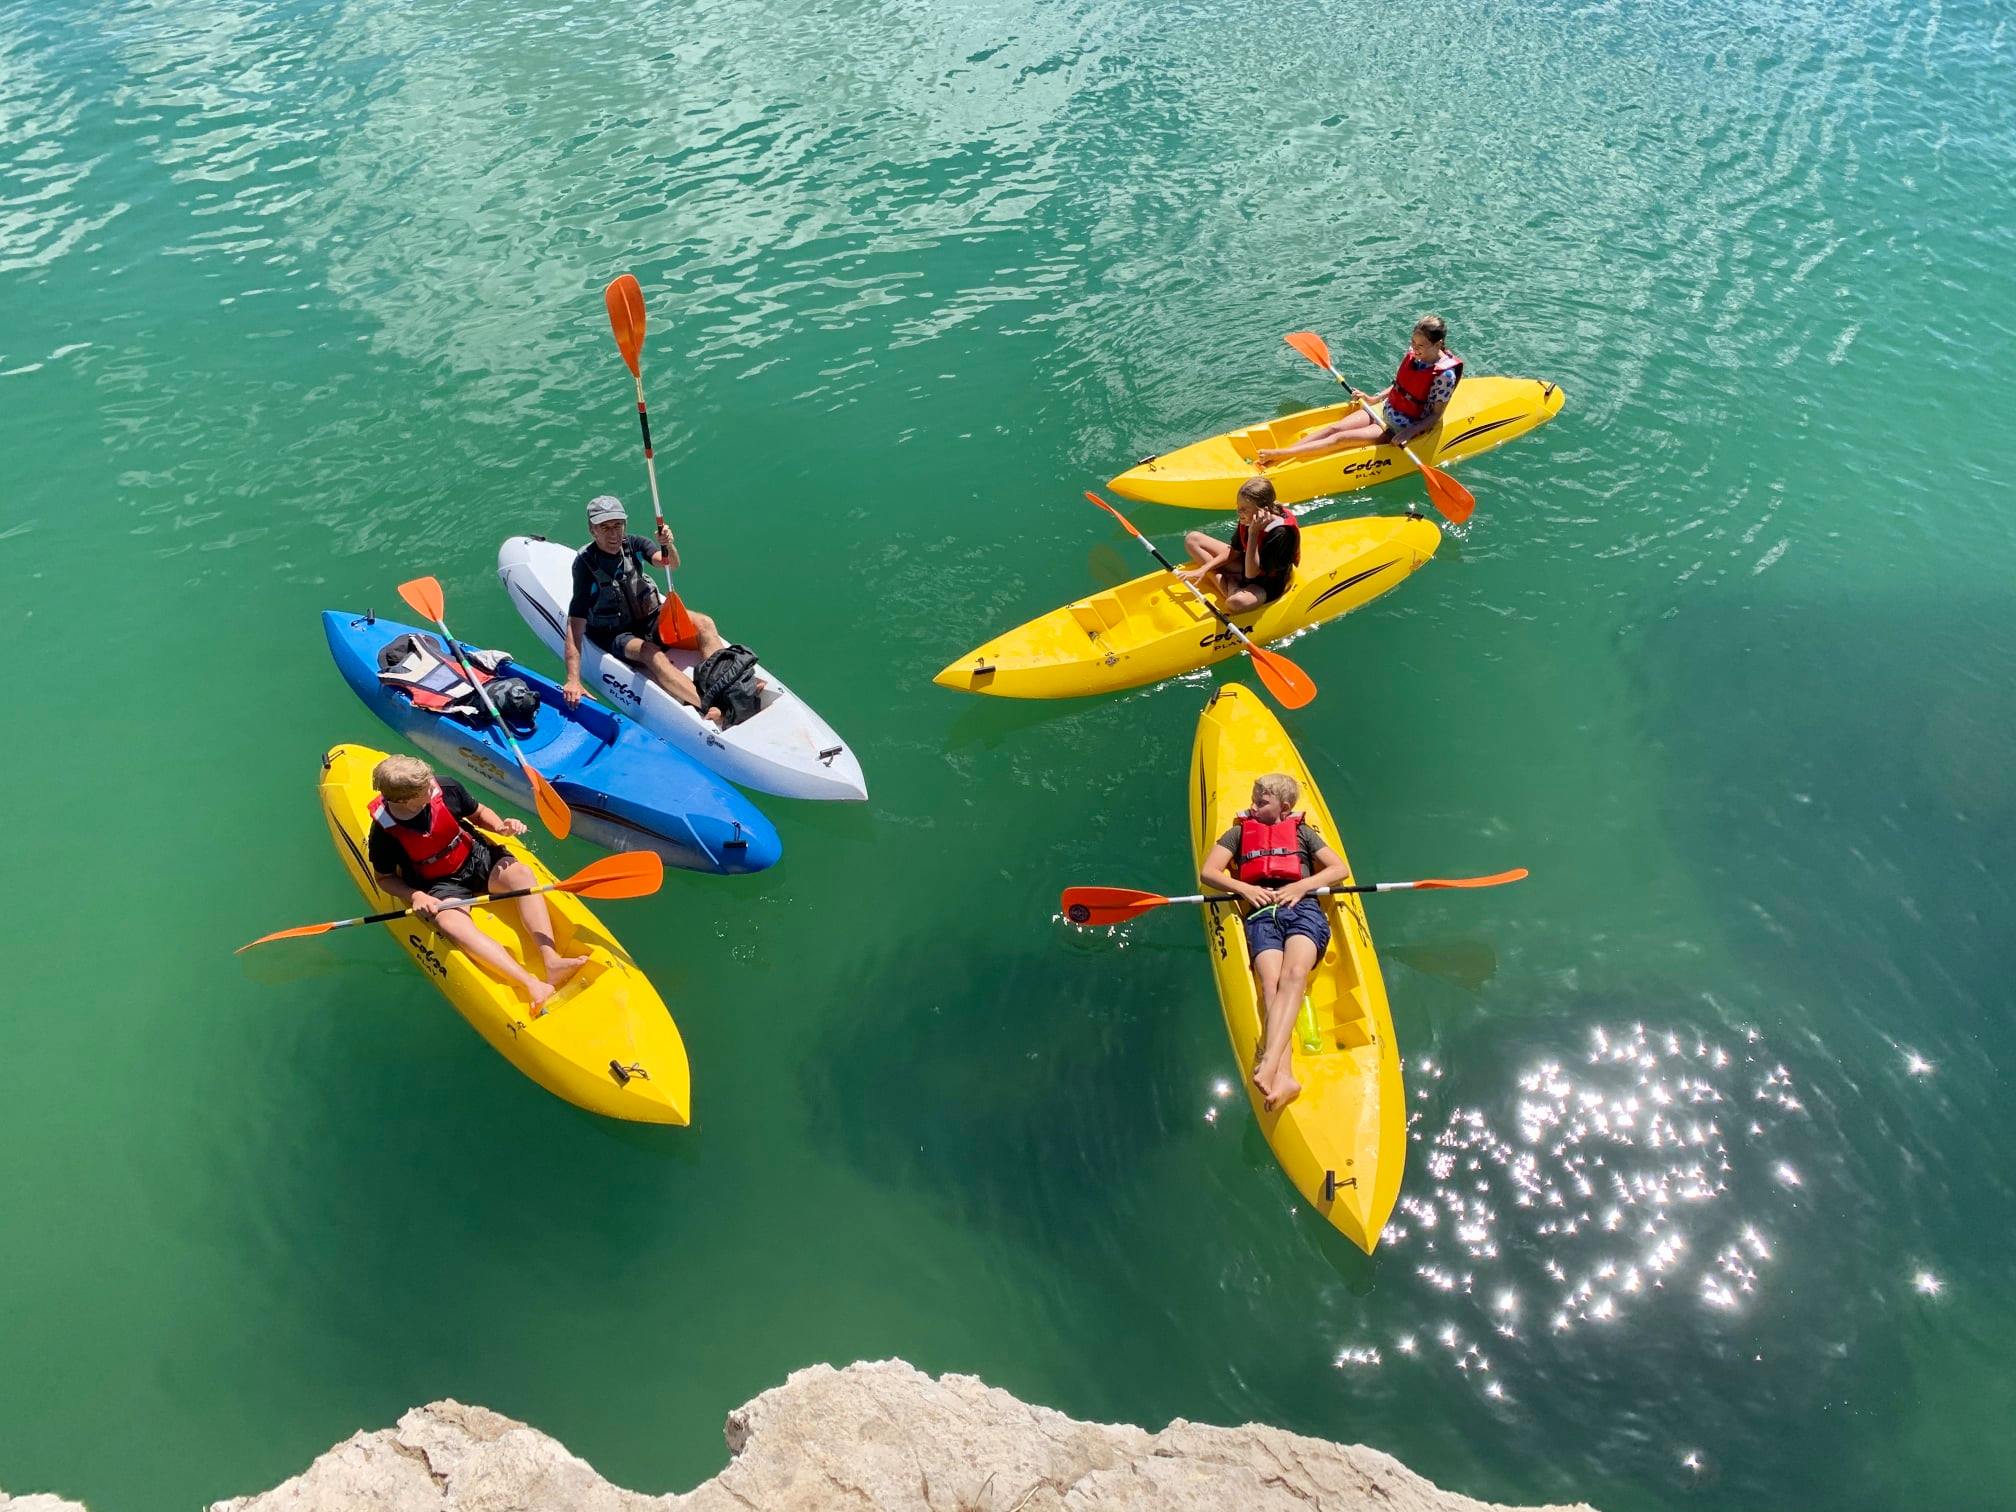 Kayaking is a lot of fun in Sintra
